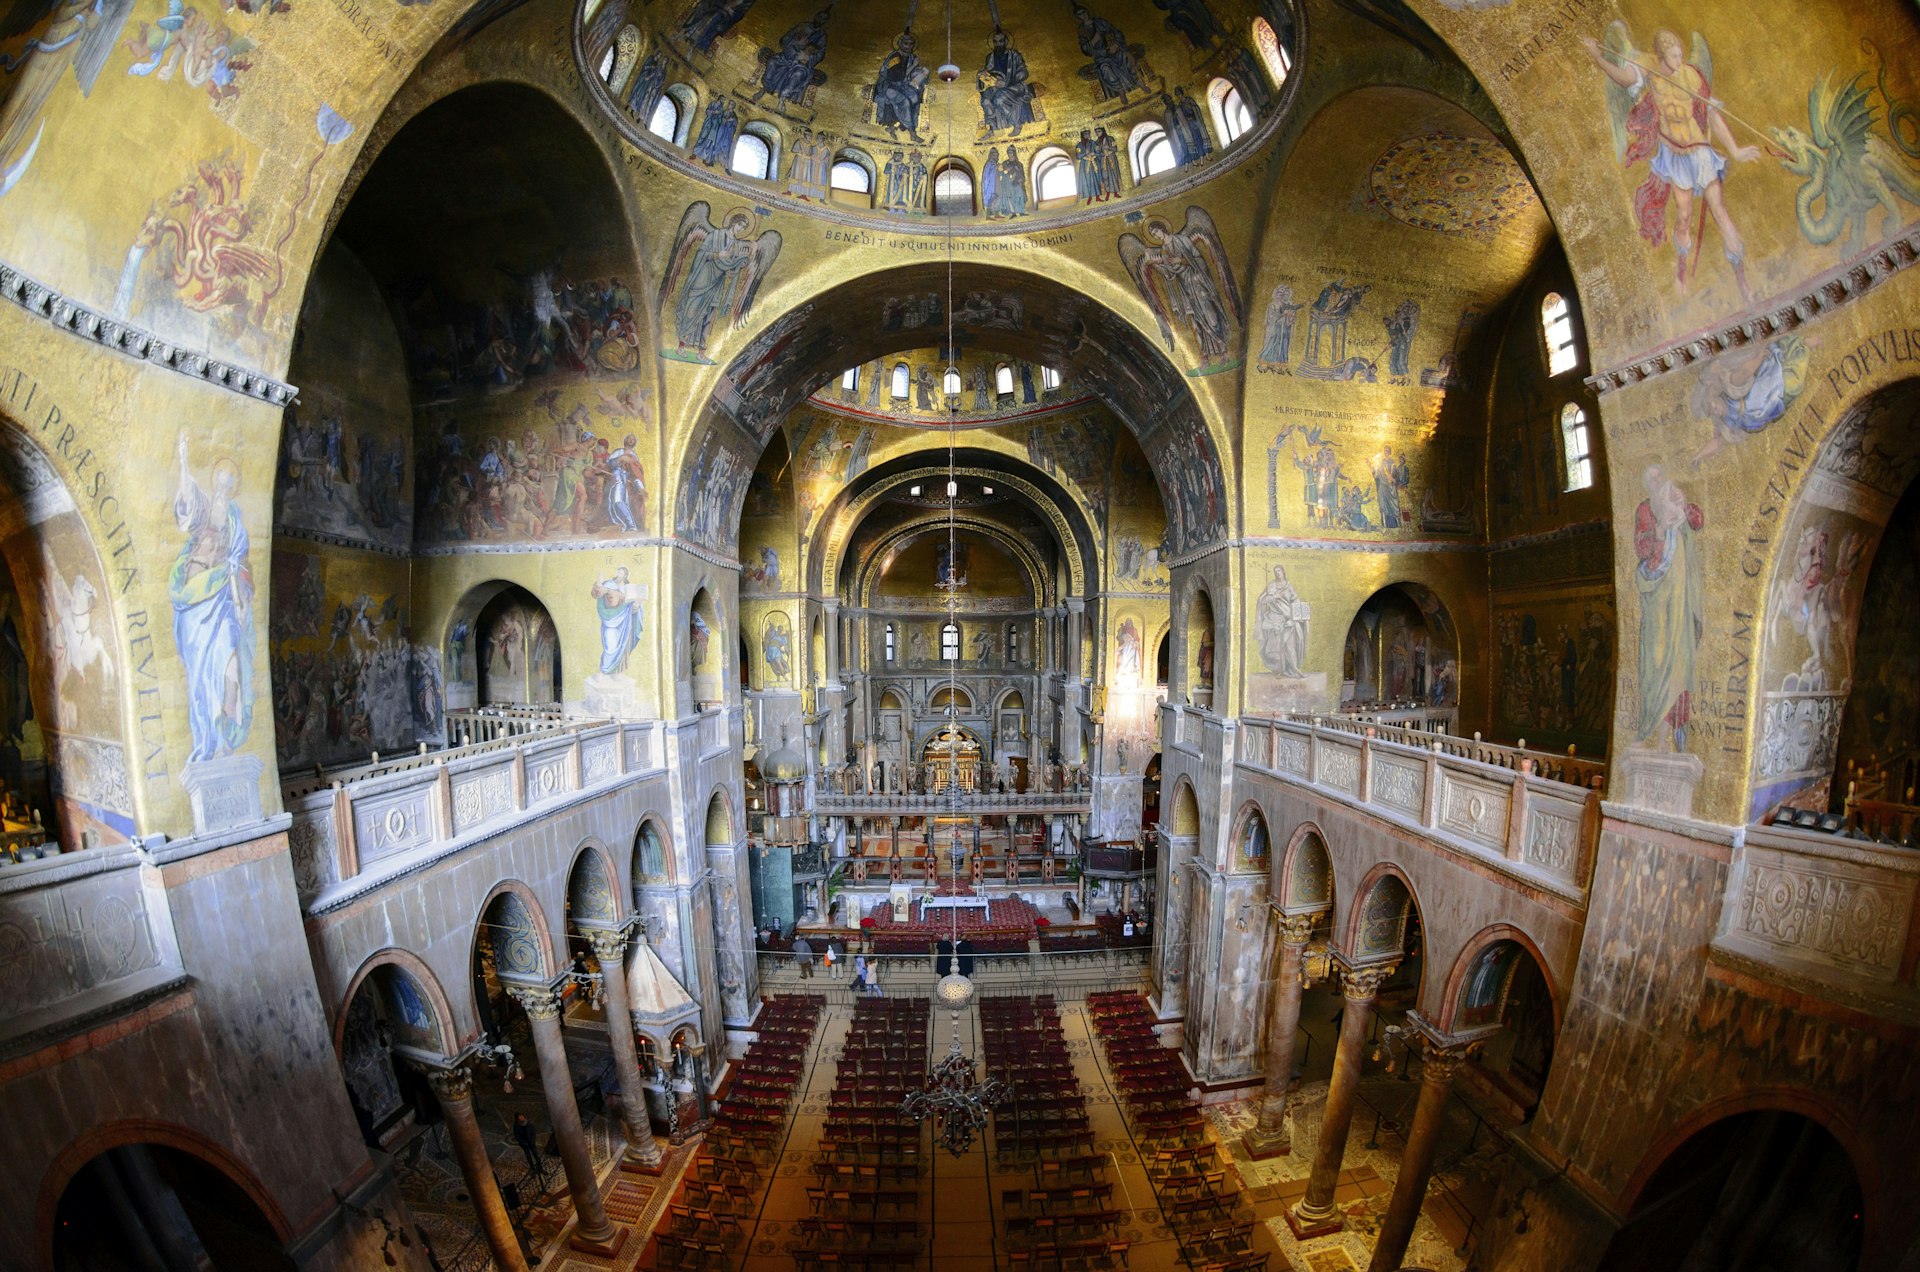 A glimpse of heaven: St Mark's Basilica. Image by Education Images/UIG/Getty Images